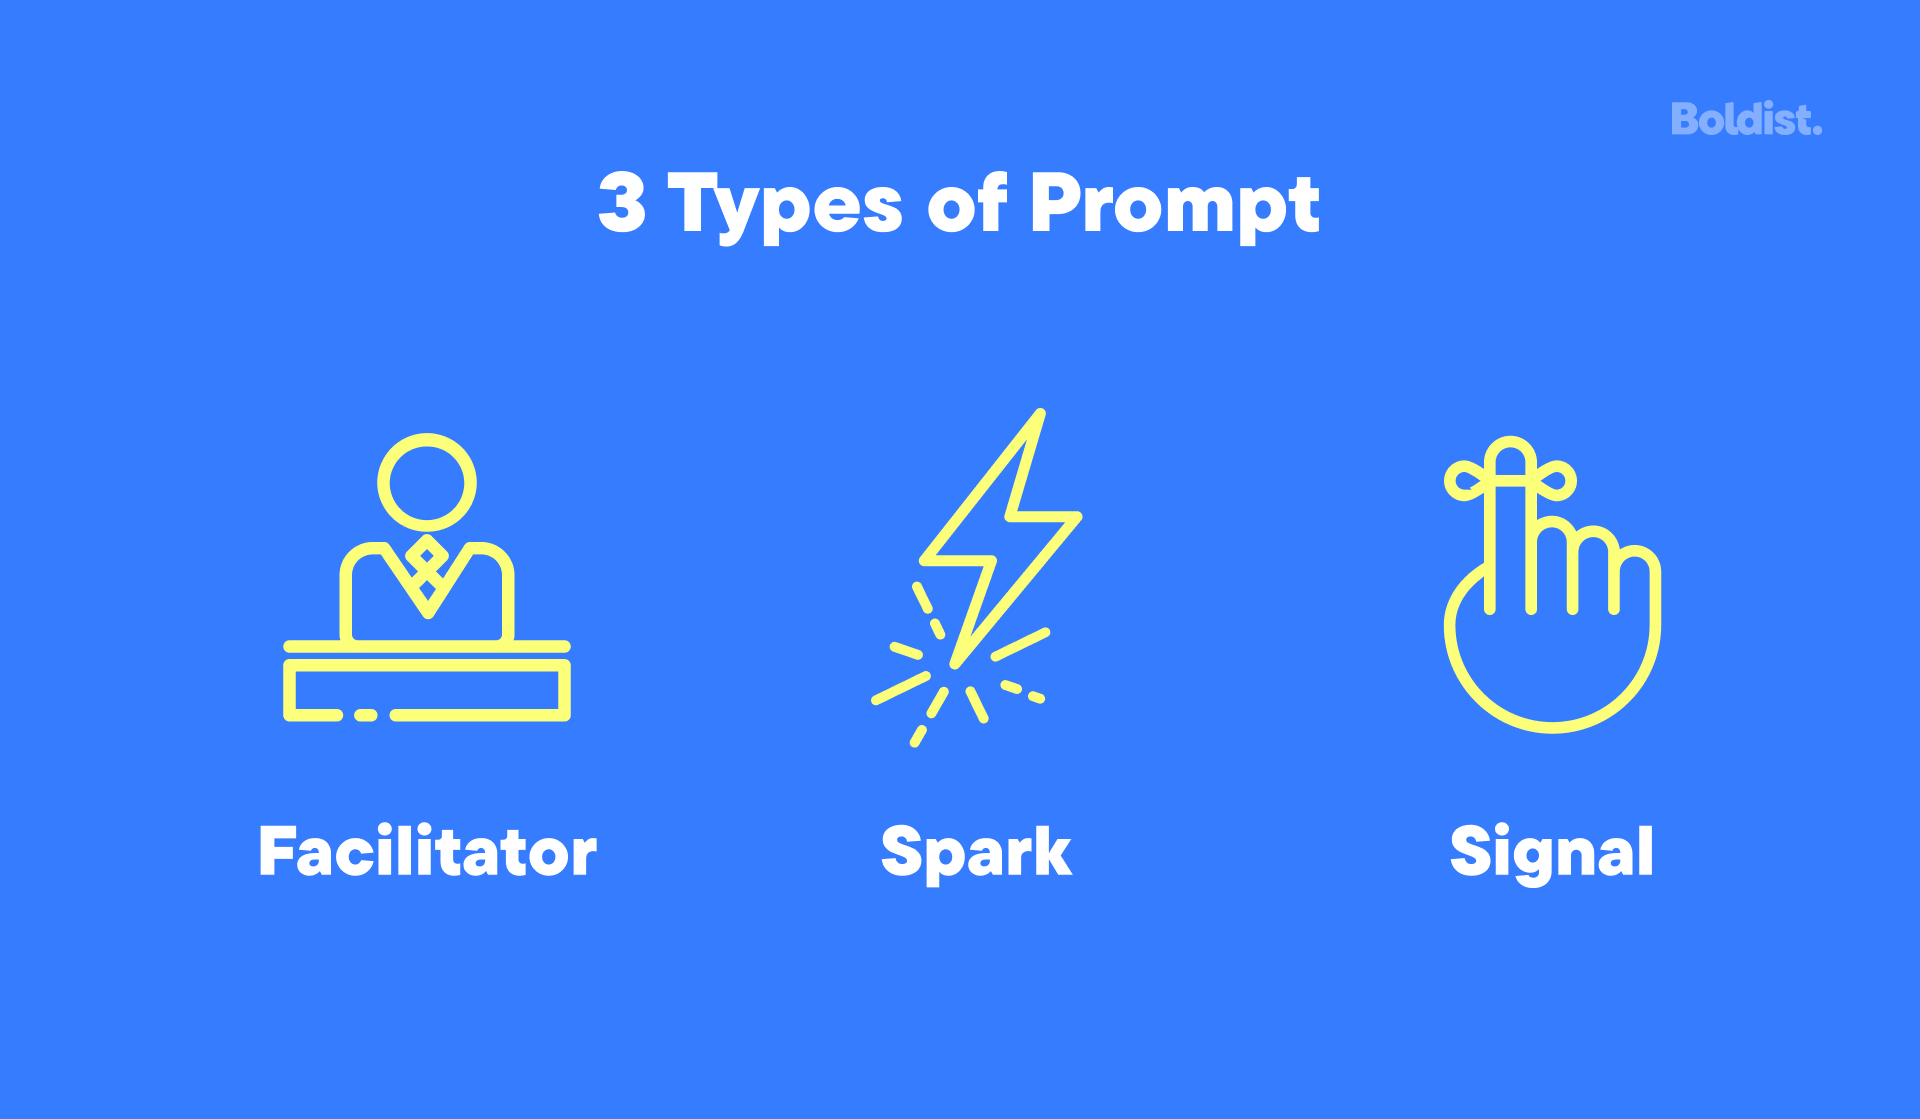 3 Types of Prompt: Facilitator, Spark, and Signal.